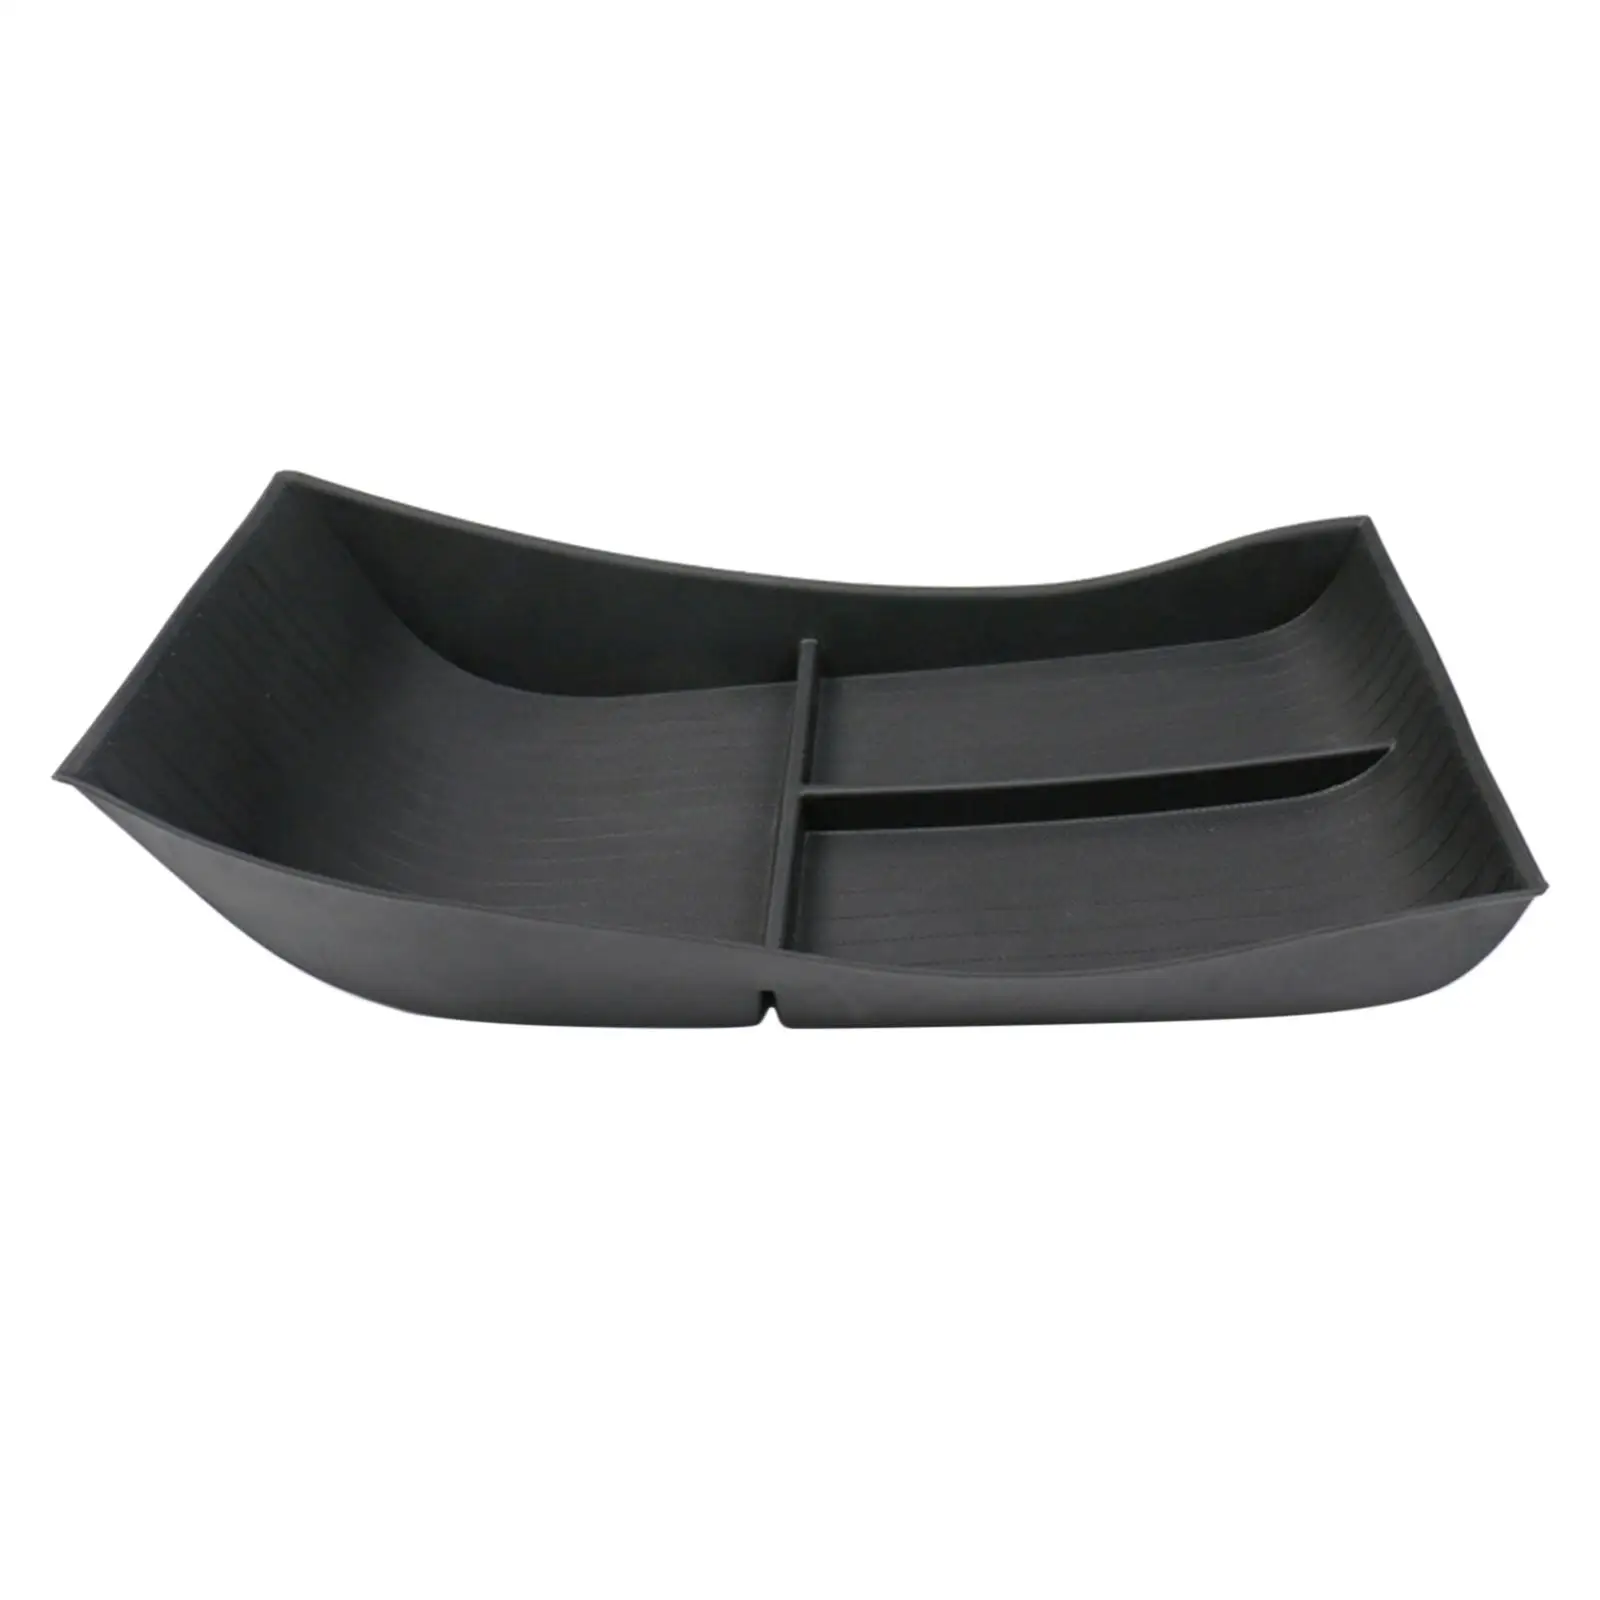 Automotive Center Console Lower Organizer Tray for Byd Seal Accessory